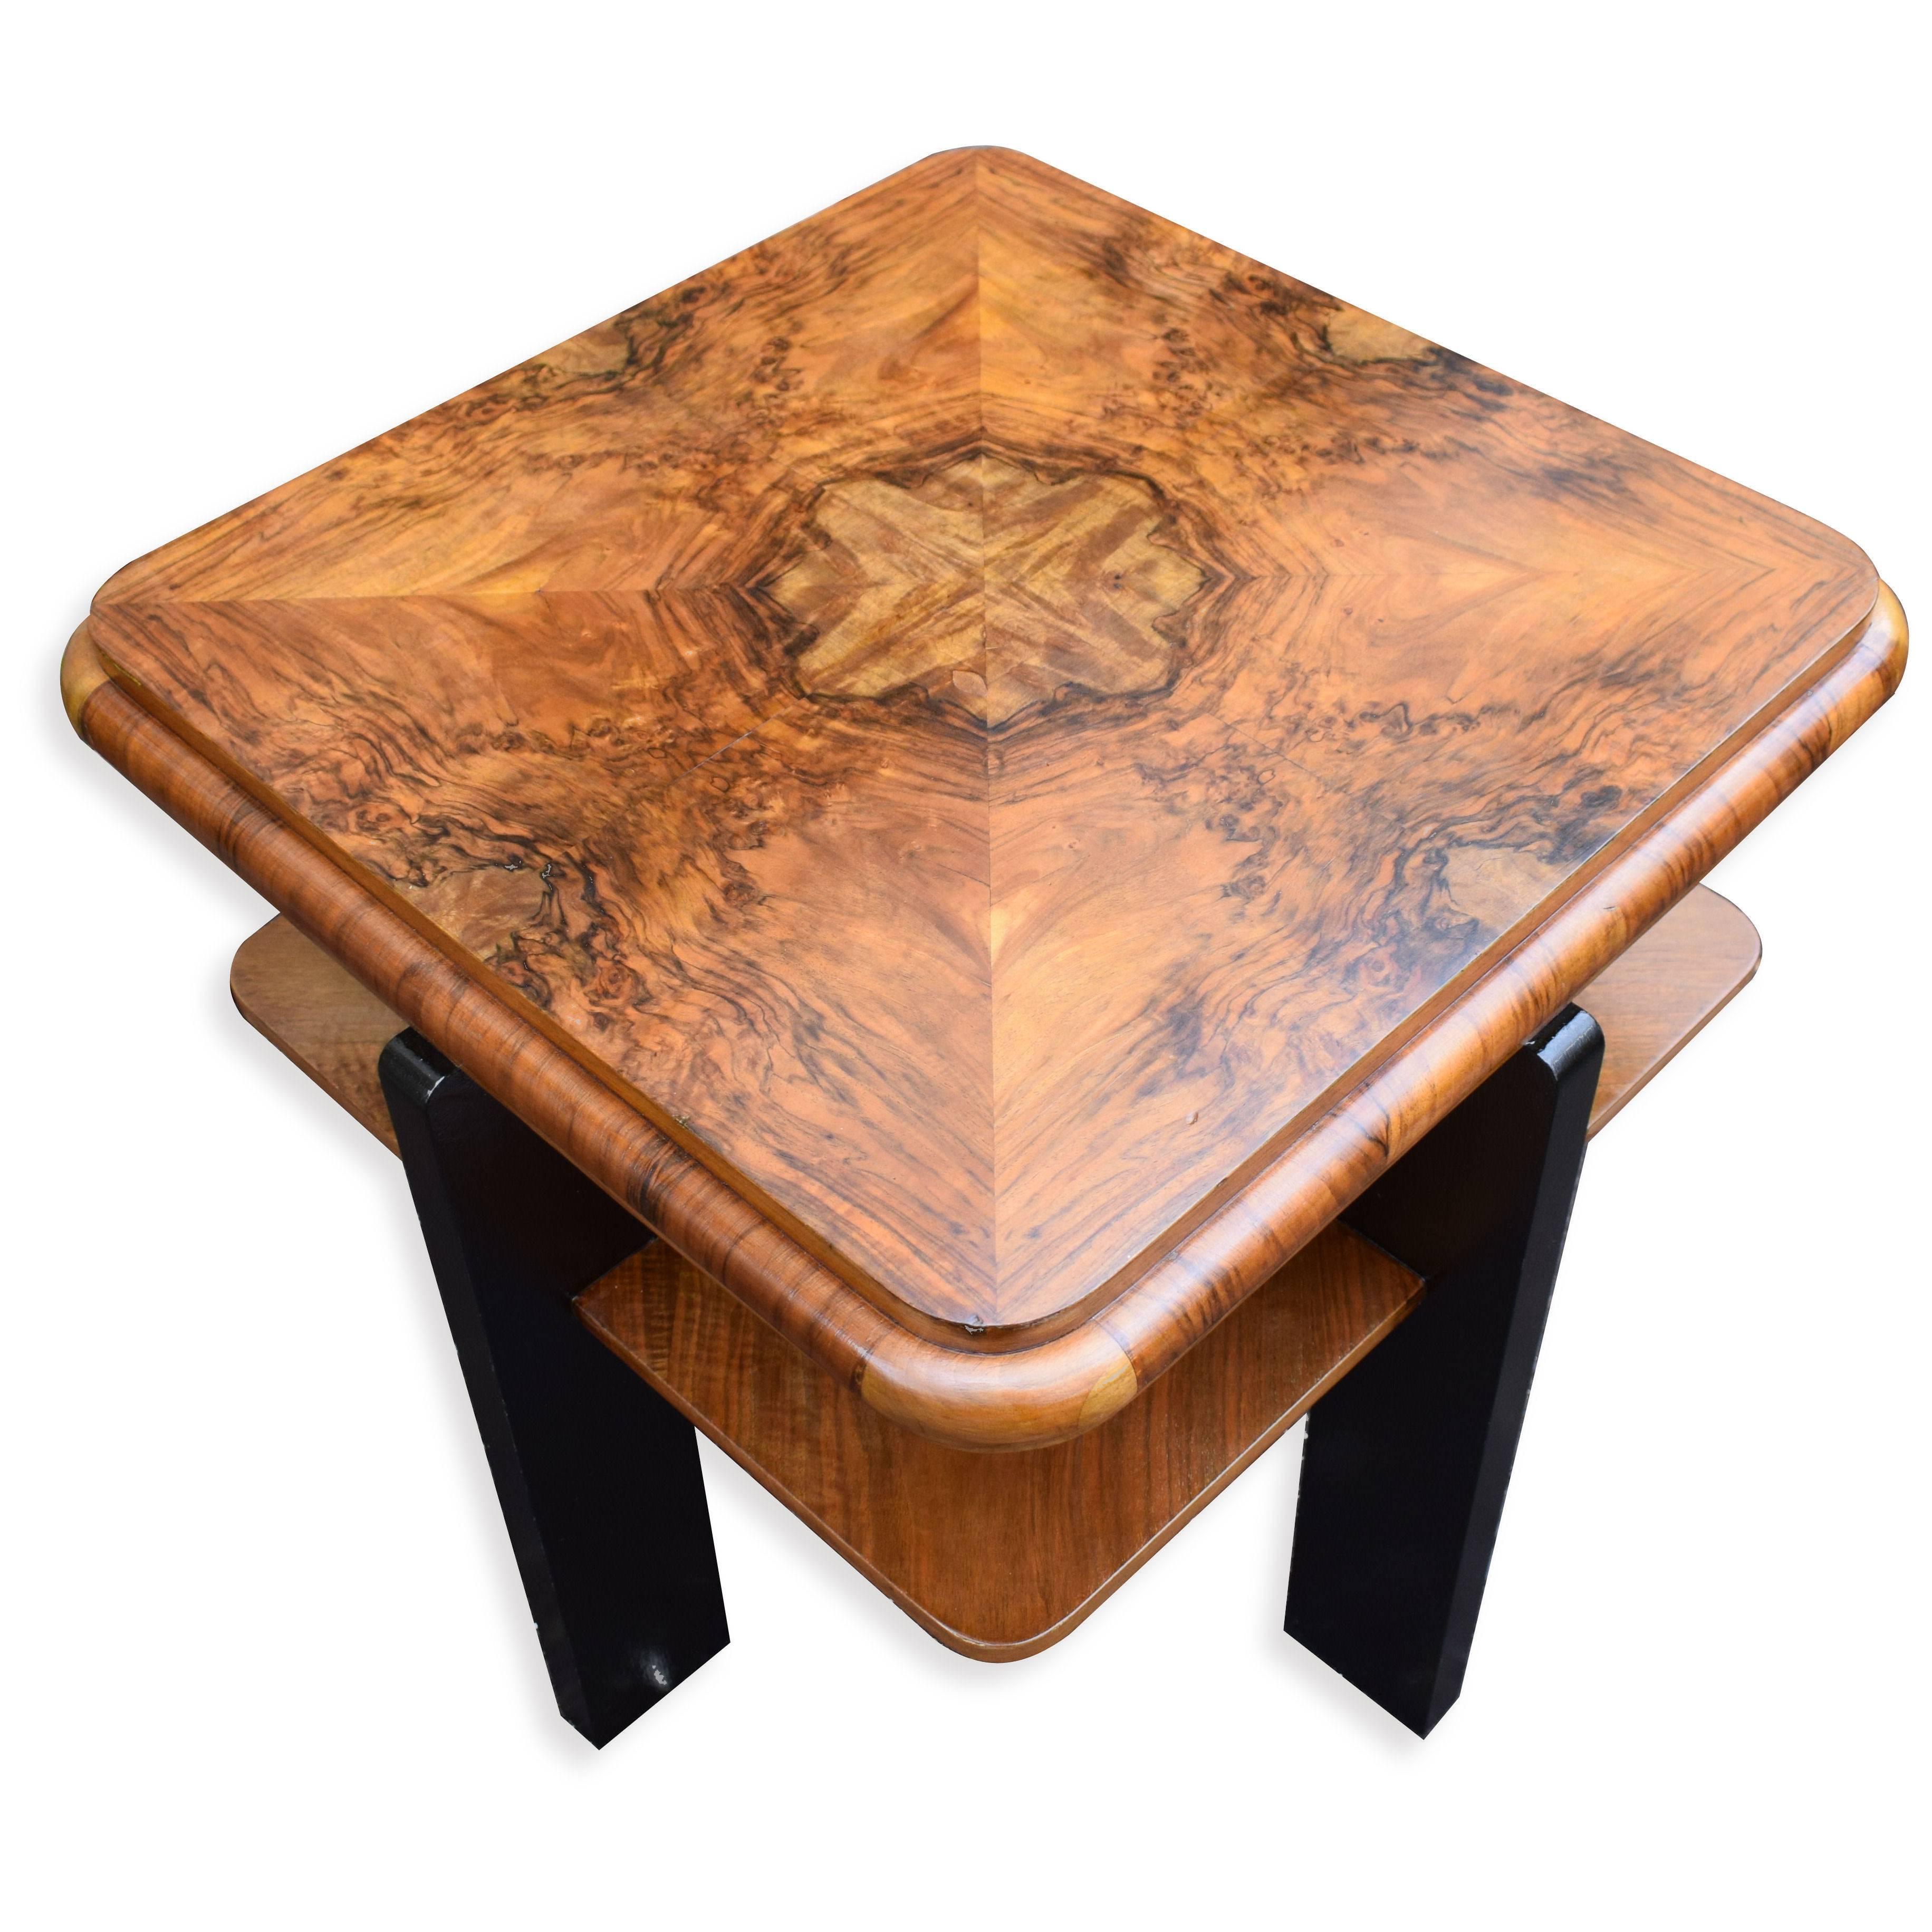 For your consideration is this outstanding 1930s English two tiered occasional table in luxious walnut veneers. This table ouzes quality, the top is heavily figured and is eight quarter veneered rather than four so that you get the full center of